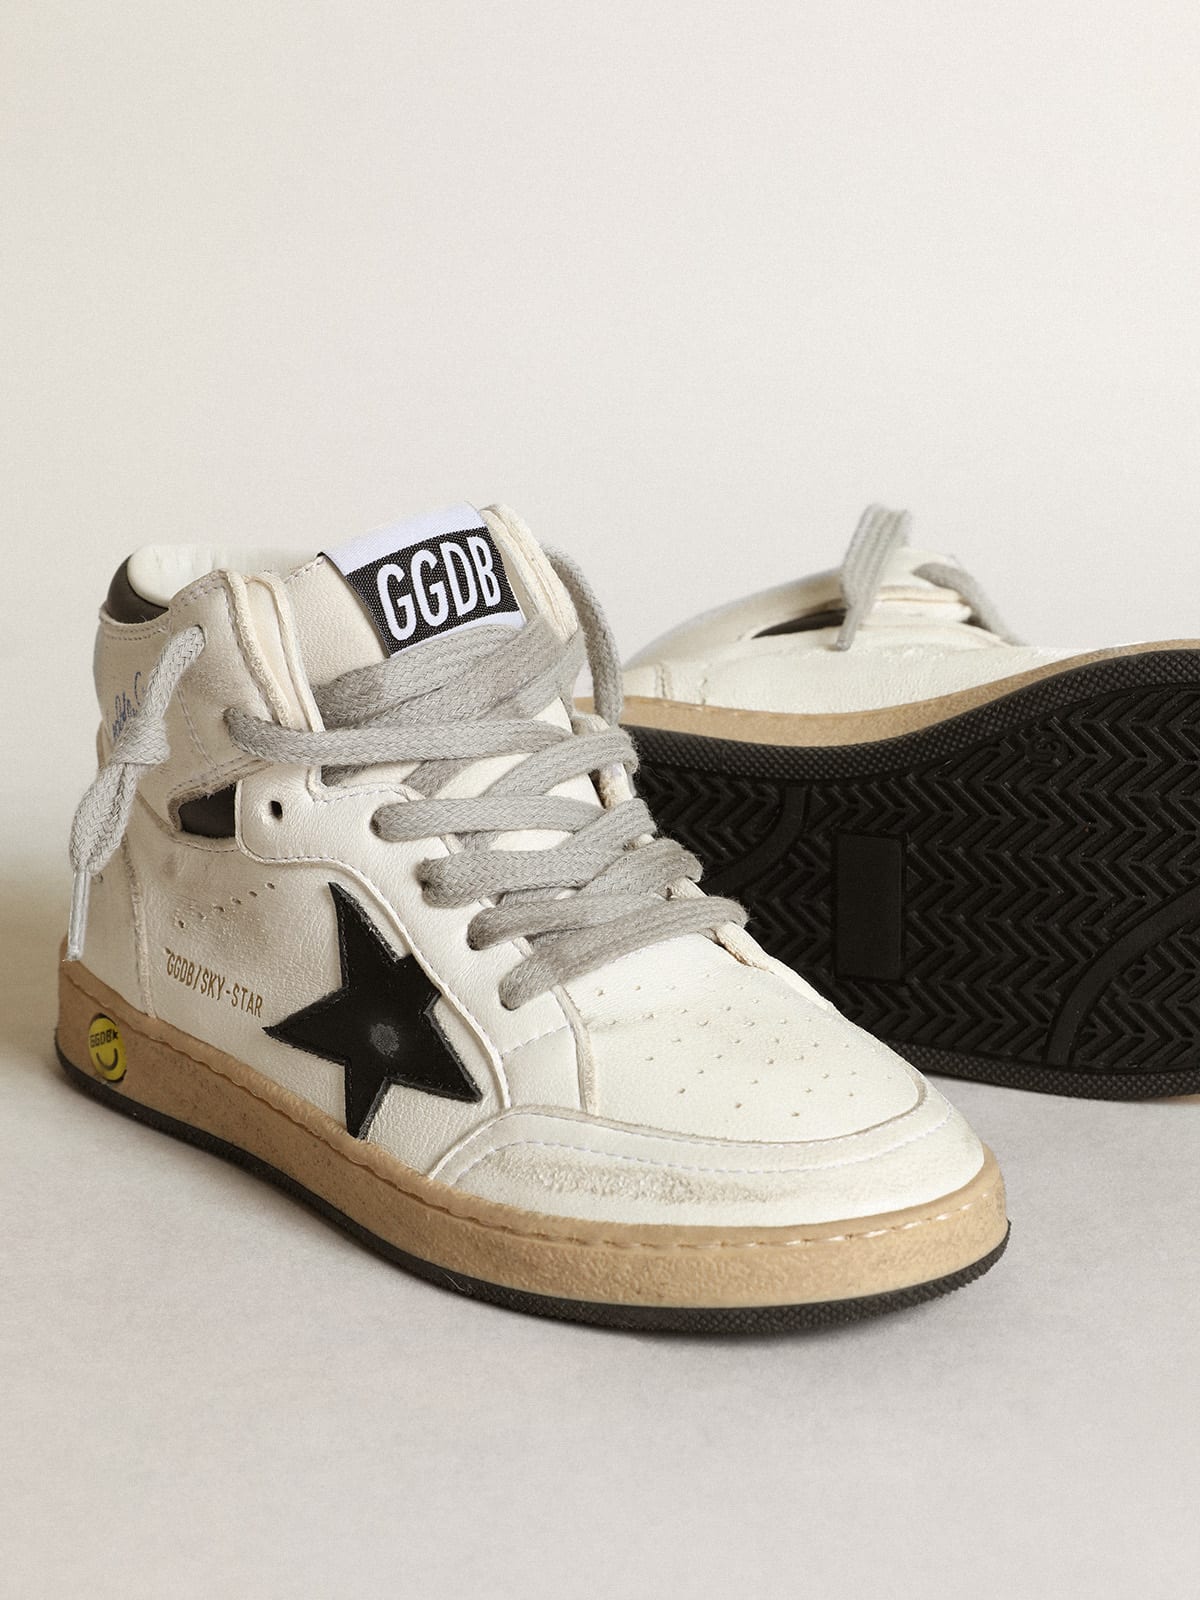 Golden Goose - Young Sky-Star sneakers in white nappa leather with black leather star and heel tab in 